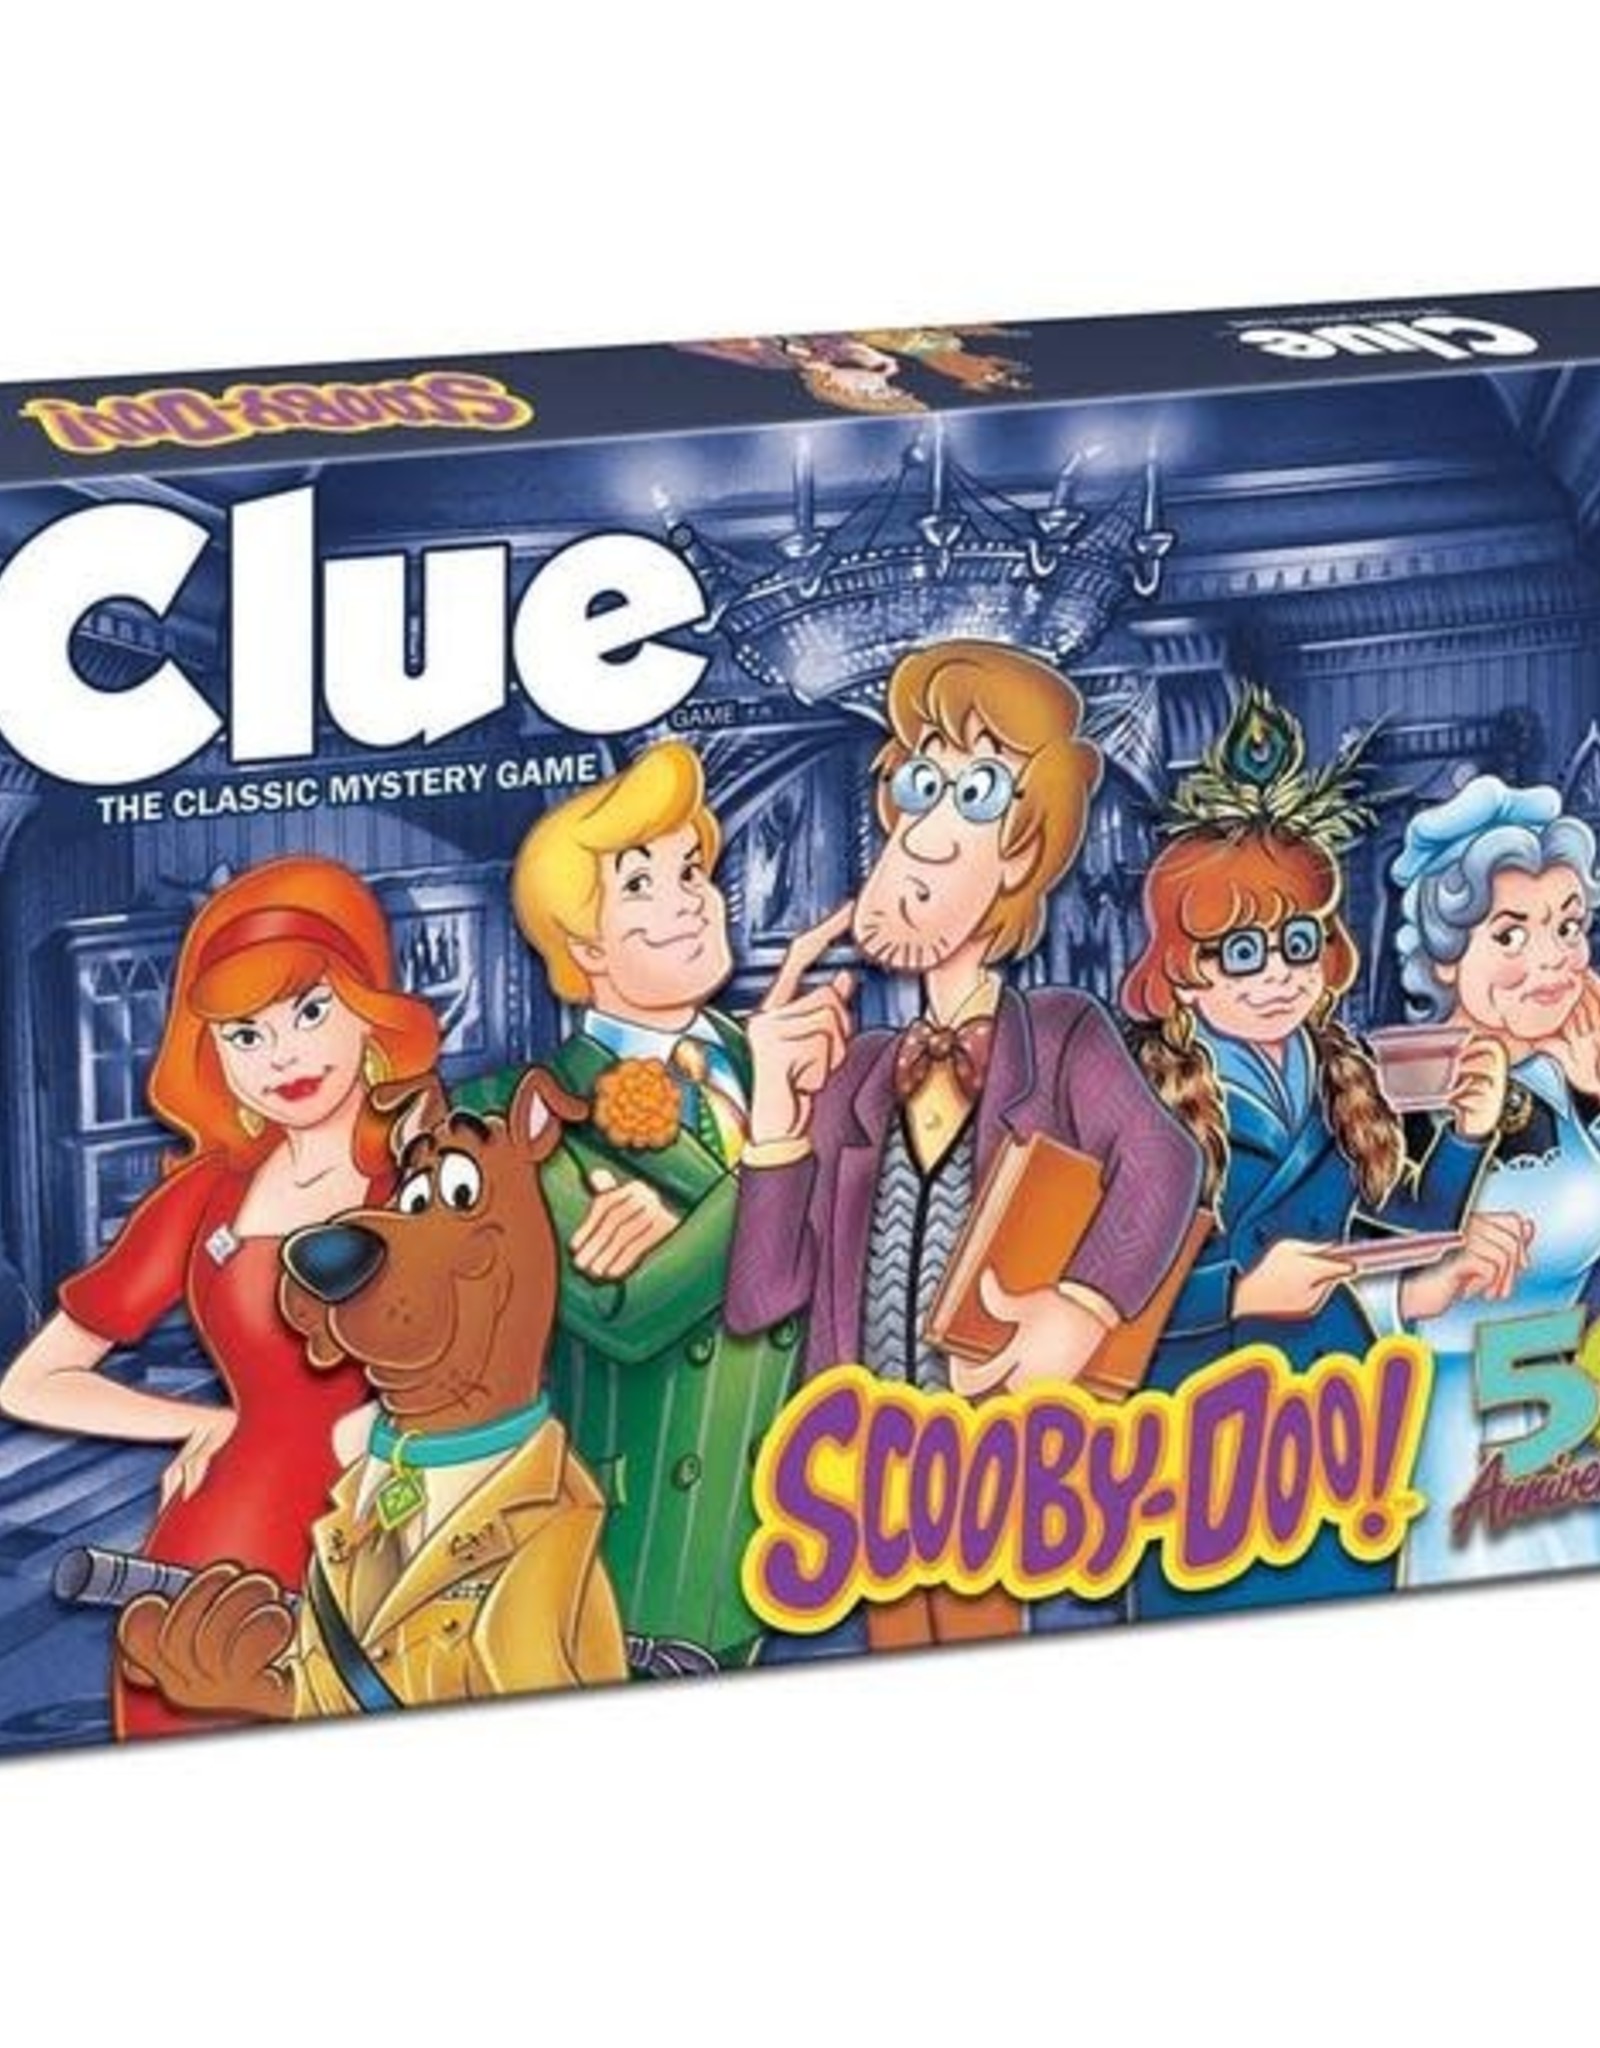 USAopoly Clue: Scooby-Doo!